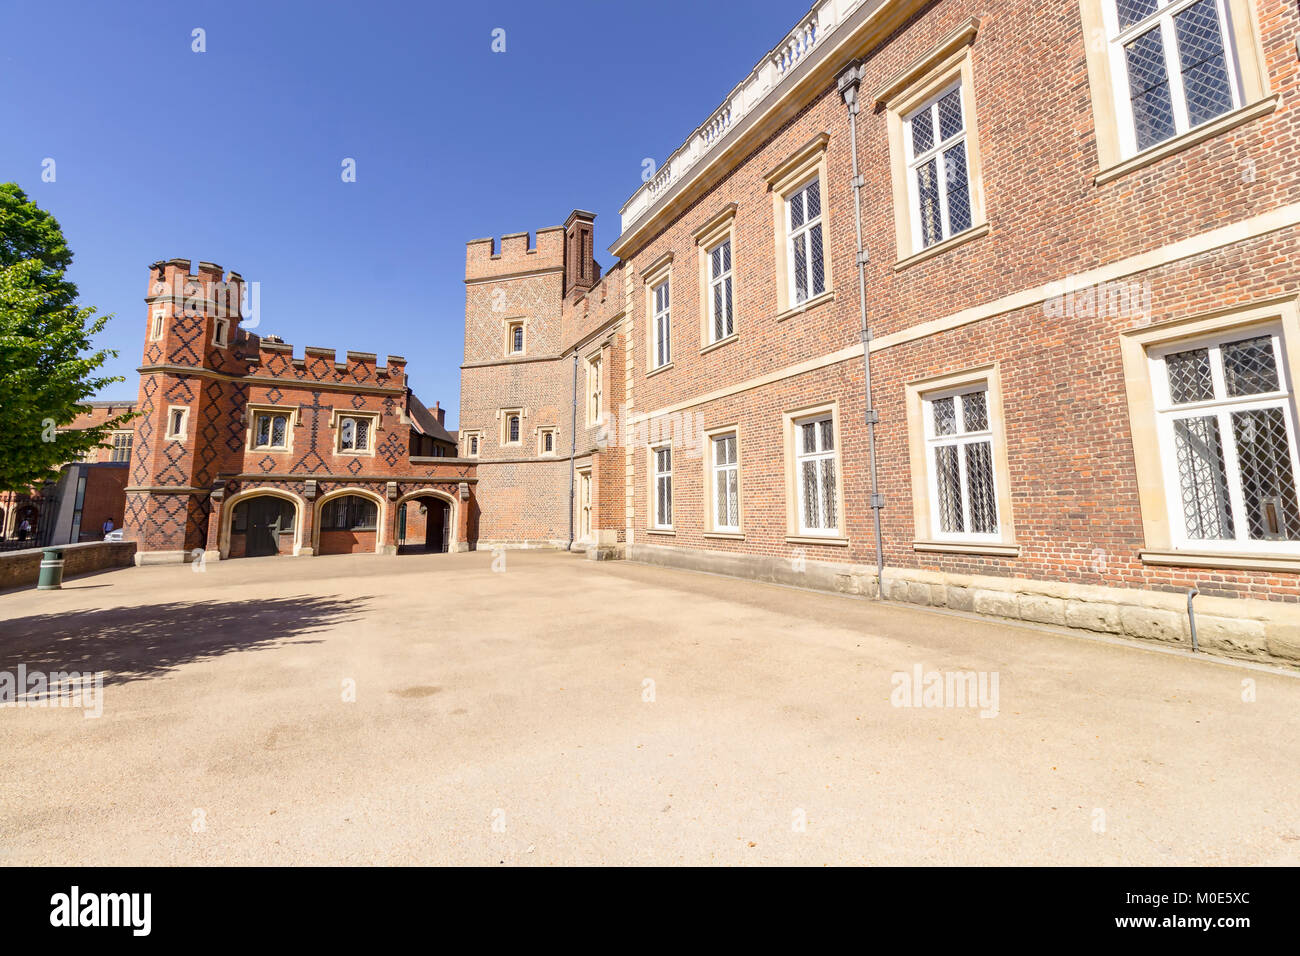 Windsor, England - 26 May 2017: Architecture of the Eton College front building in the city of Windsor, England. Stock Photo